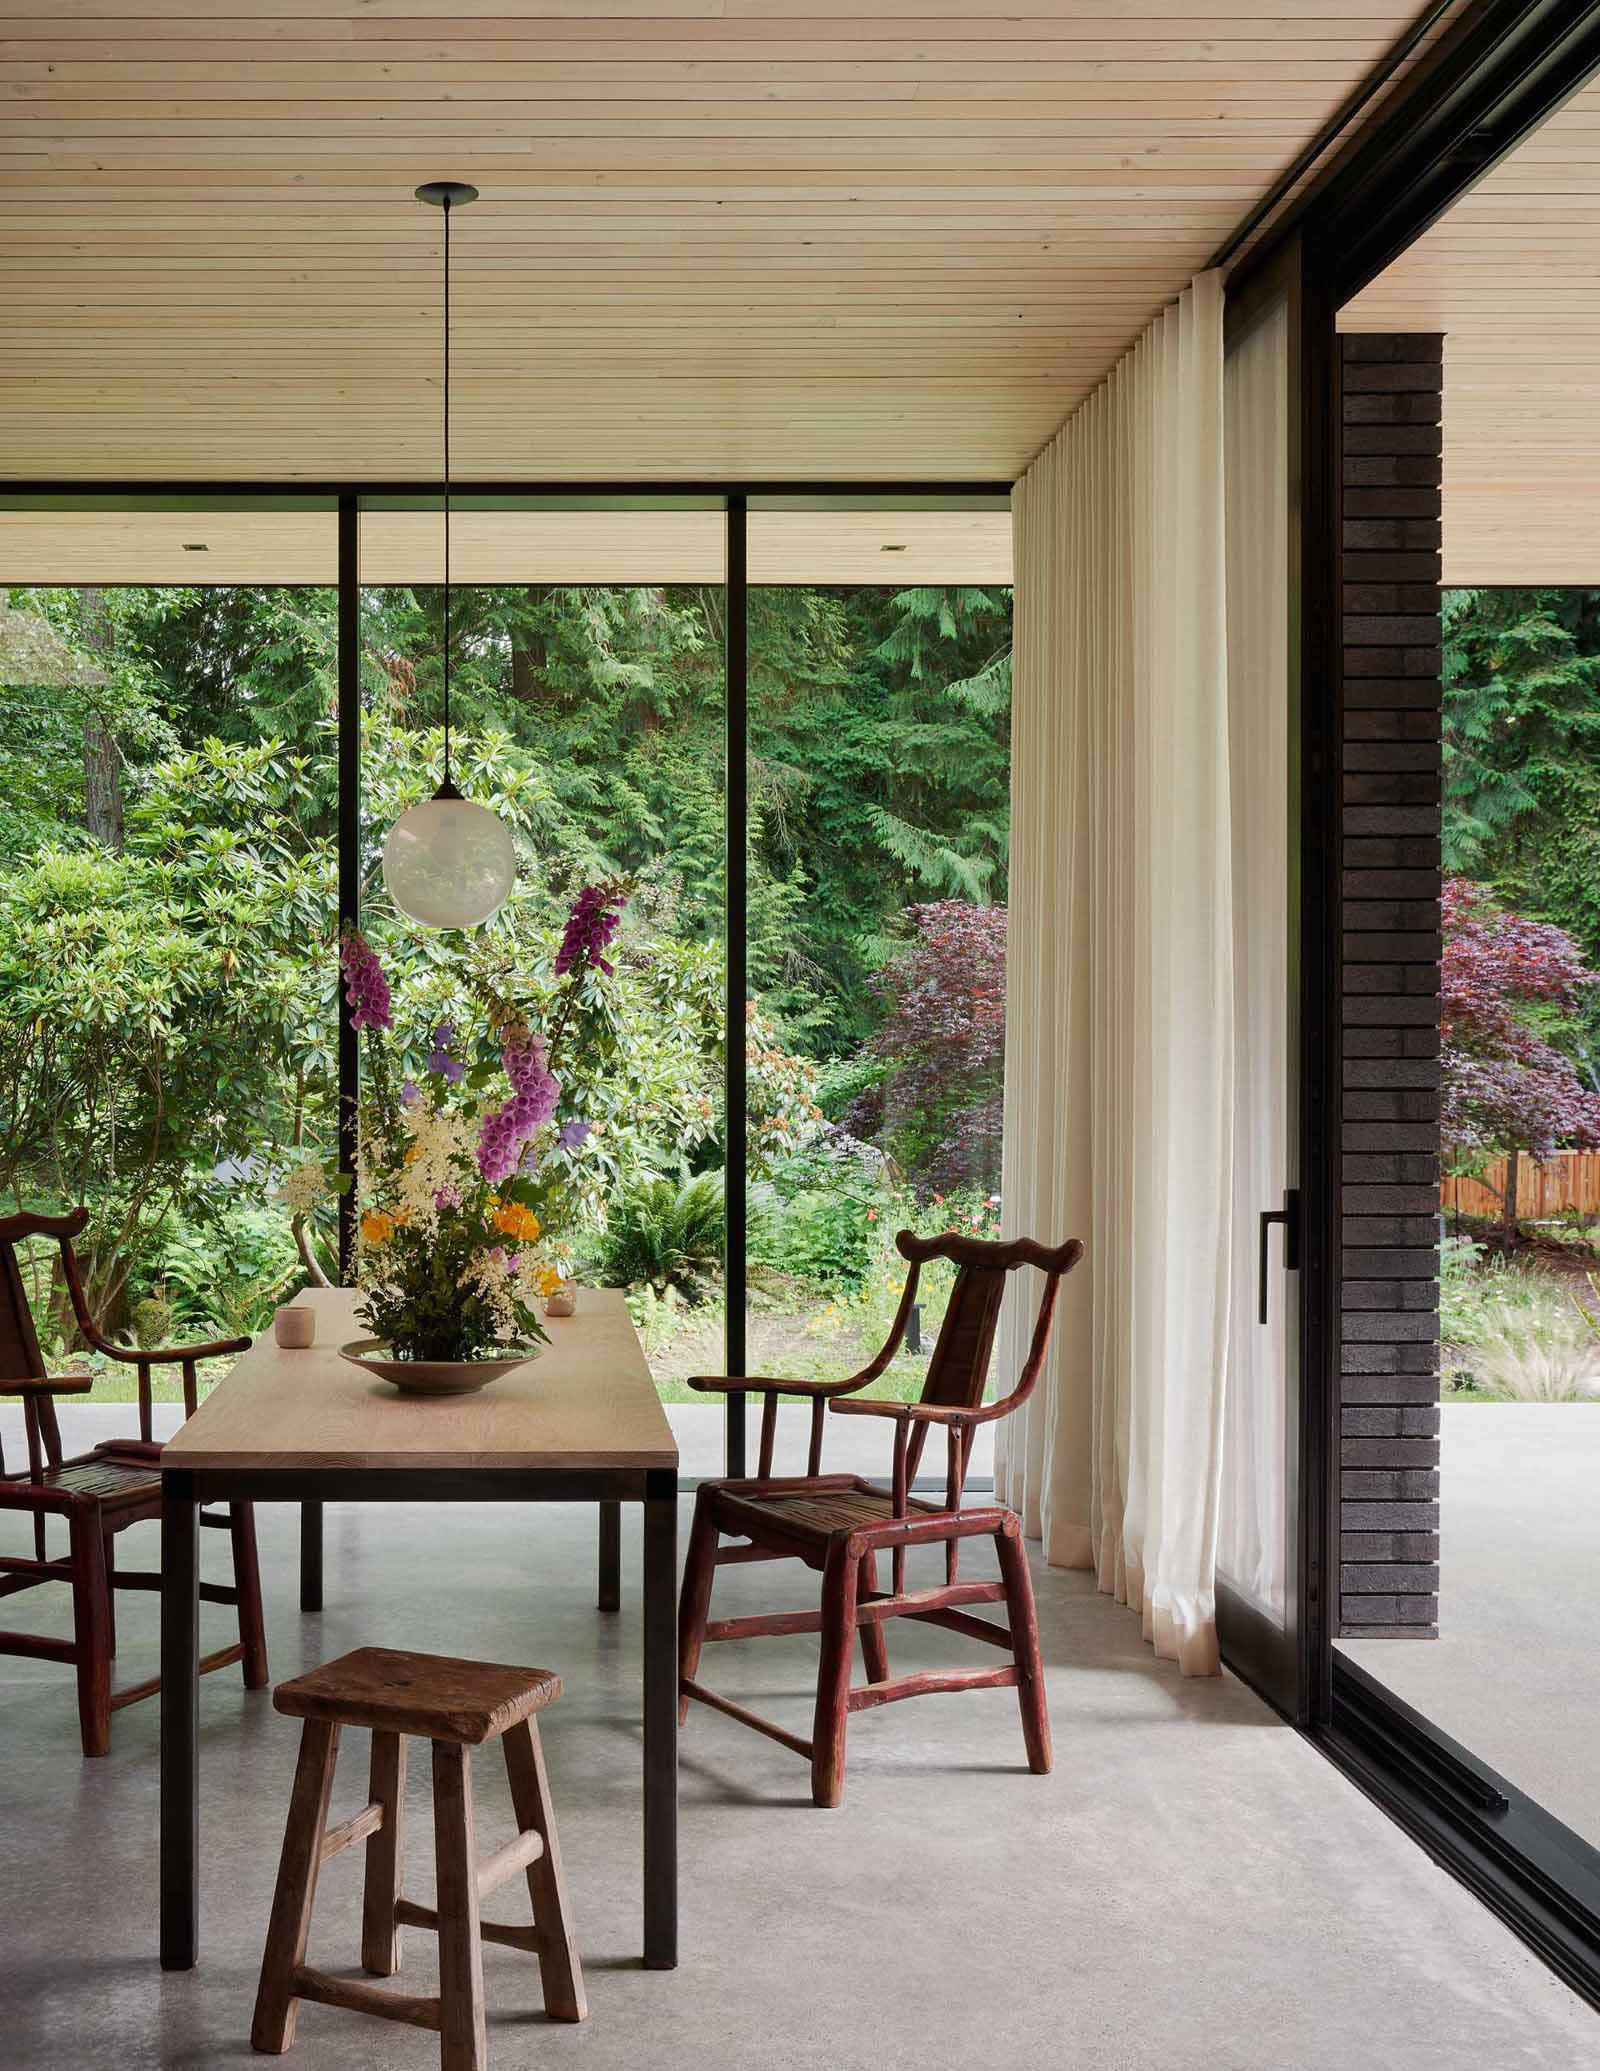 This modern home has a Douglas fir wood ceiling that's been lye-washed, while in the dining area, a table made from oak and steel has been designed by ?GO'C.